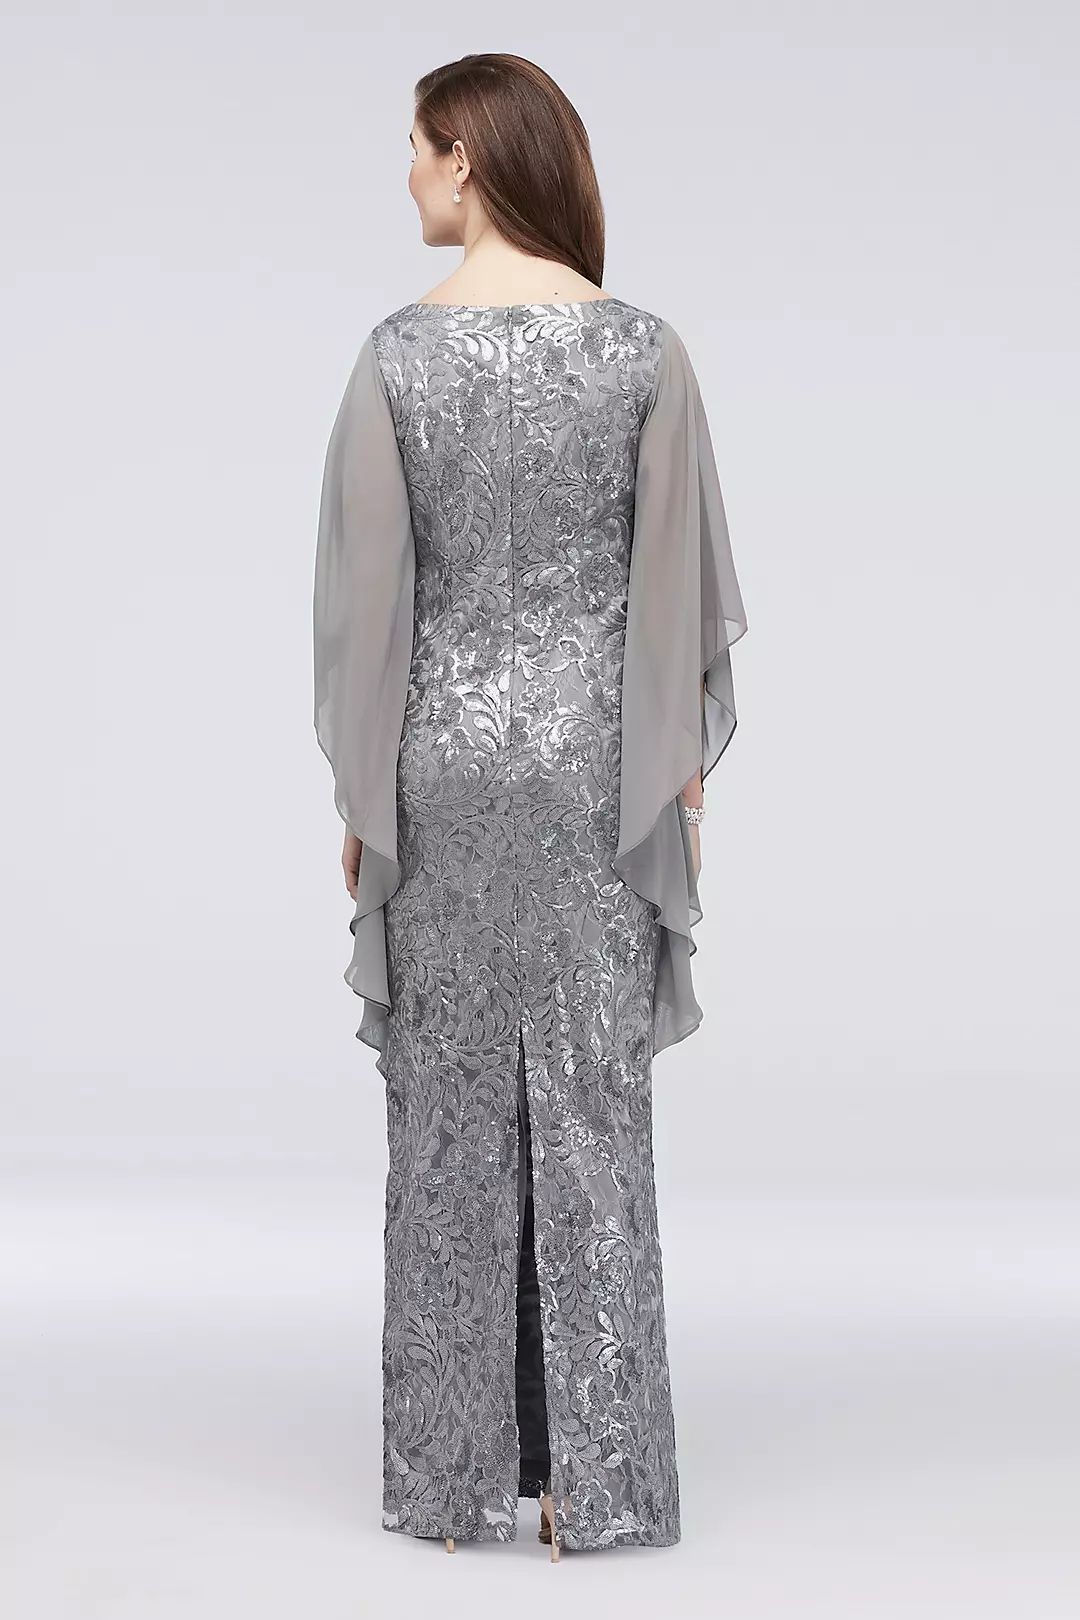 High-Neck Sequin Lace Dress with Cape Sleeves Image 2